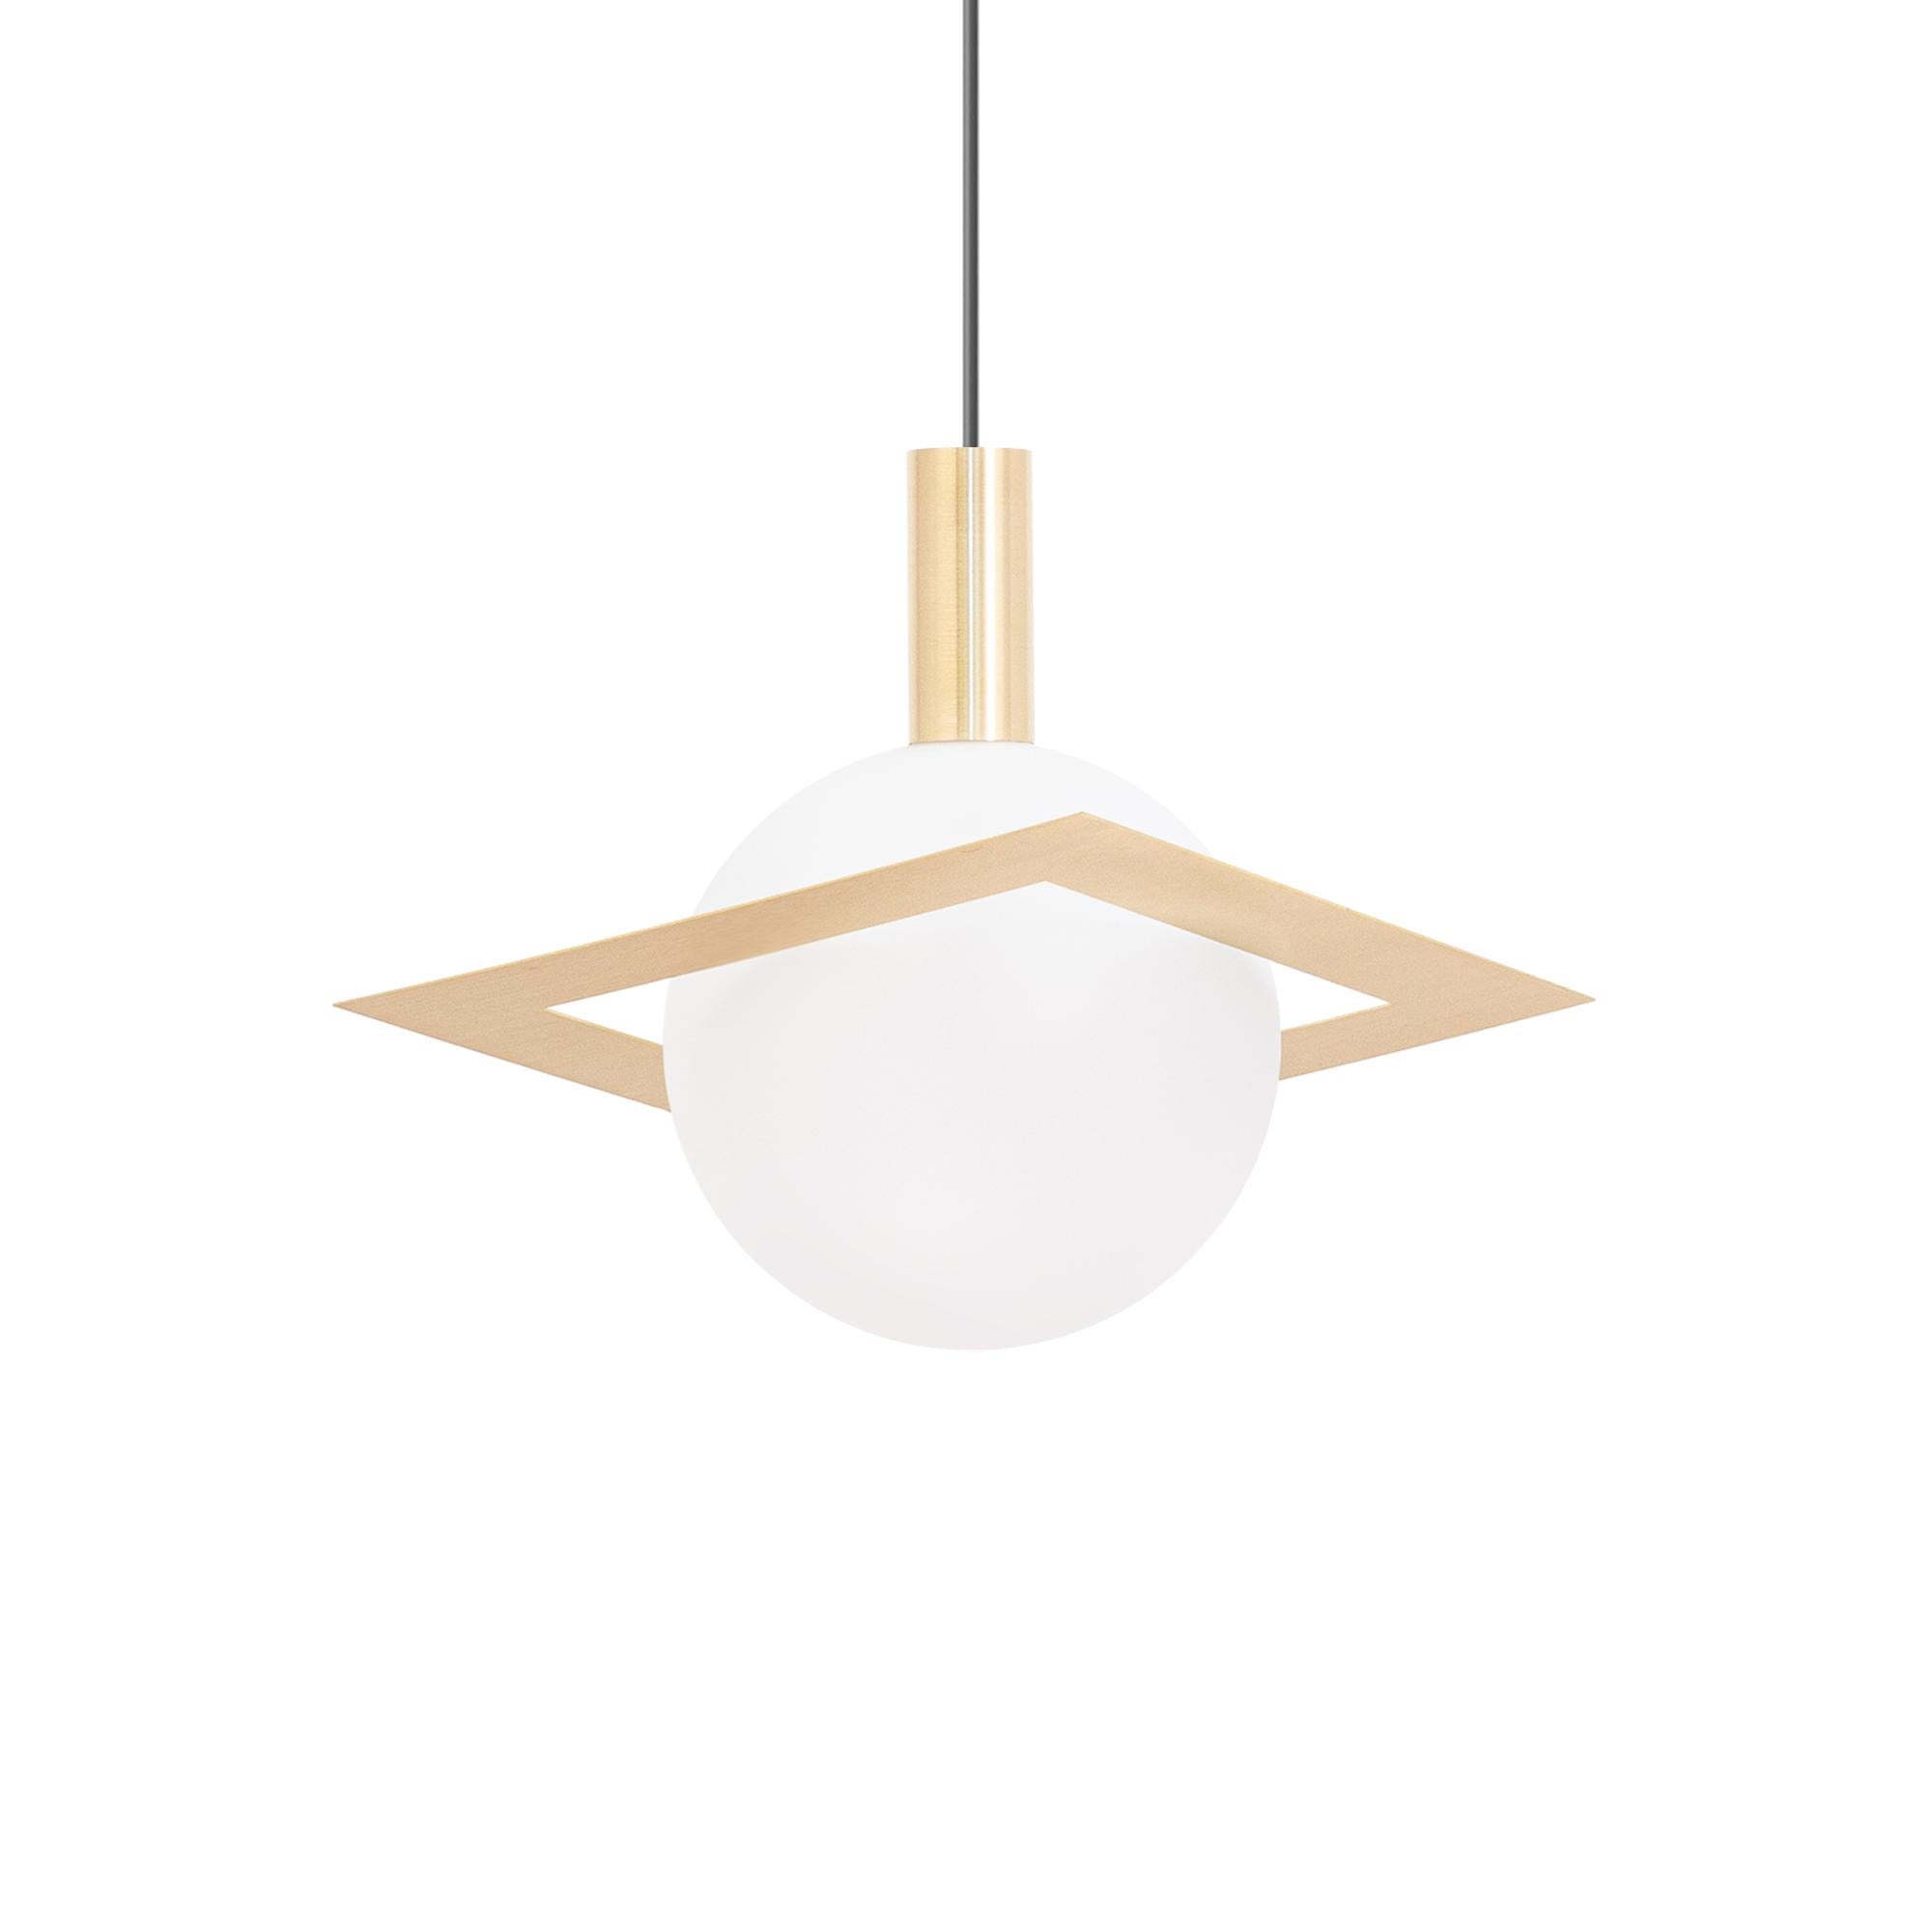 Copper quad big light by Atris
Materials: copper, satin glass
Also available in steel and brass.
Dimensions: H 30 x D 29 cm
Also available in D 21 cm.

We are the preachers of honest design, and we like to emphasize the beauty of natural